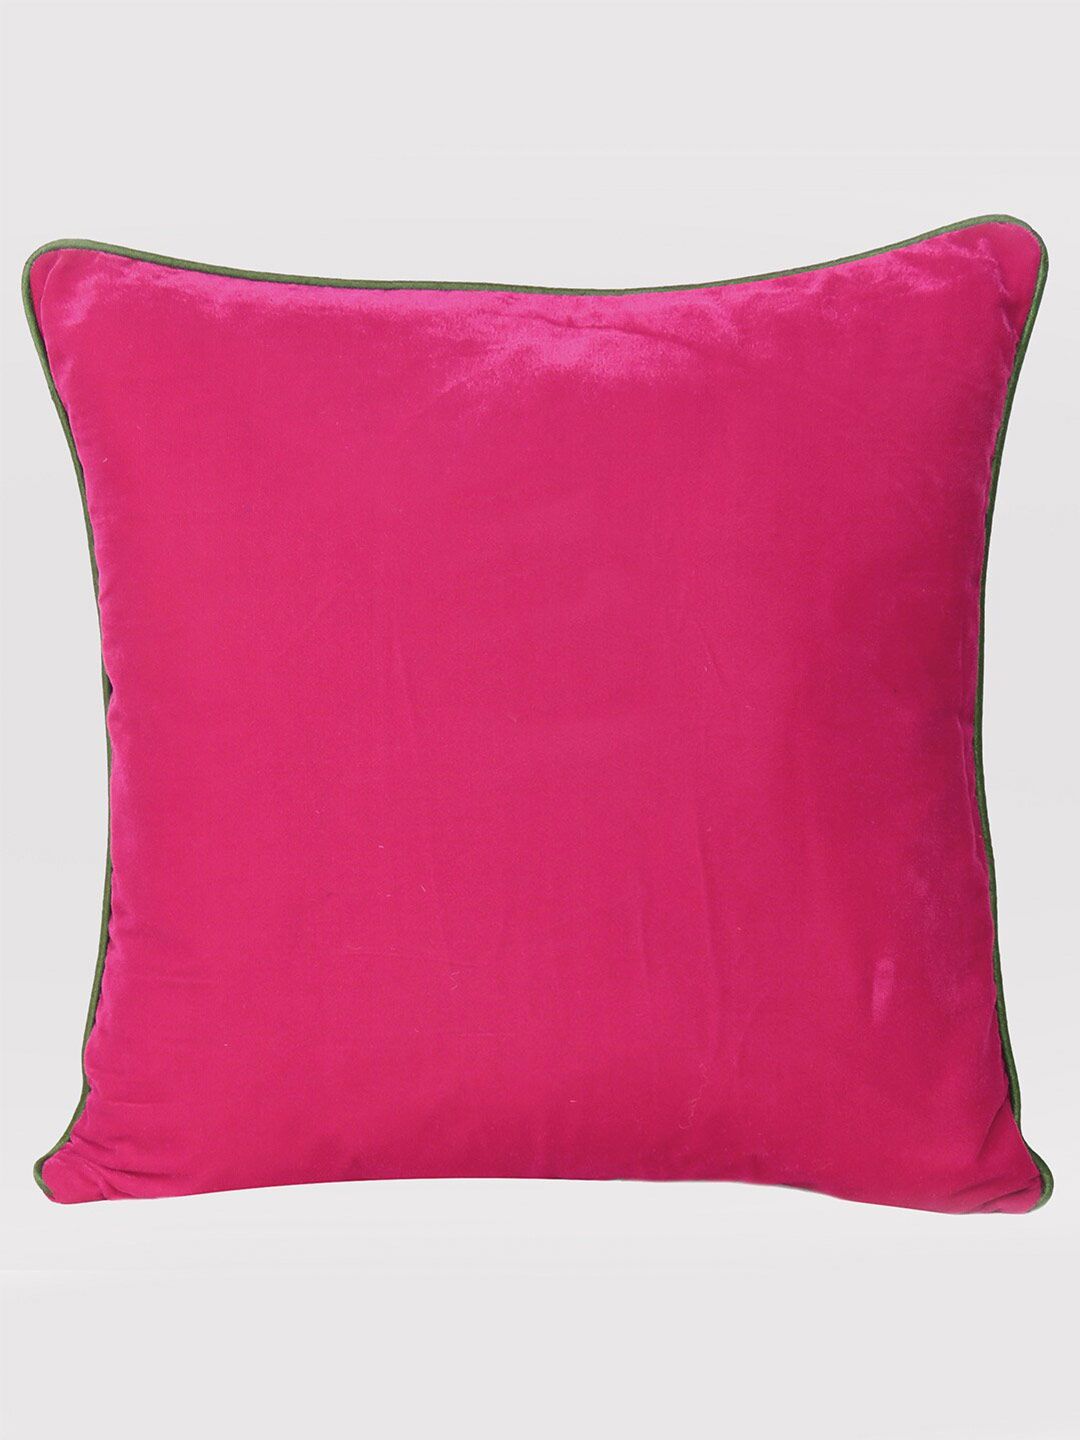 OUSSUM Pink Velvet Square Cushion Covers Price in India